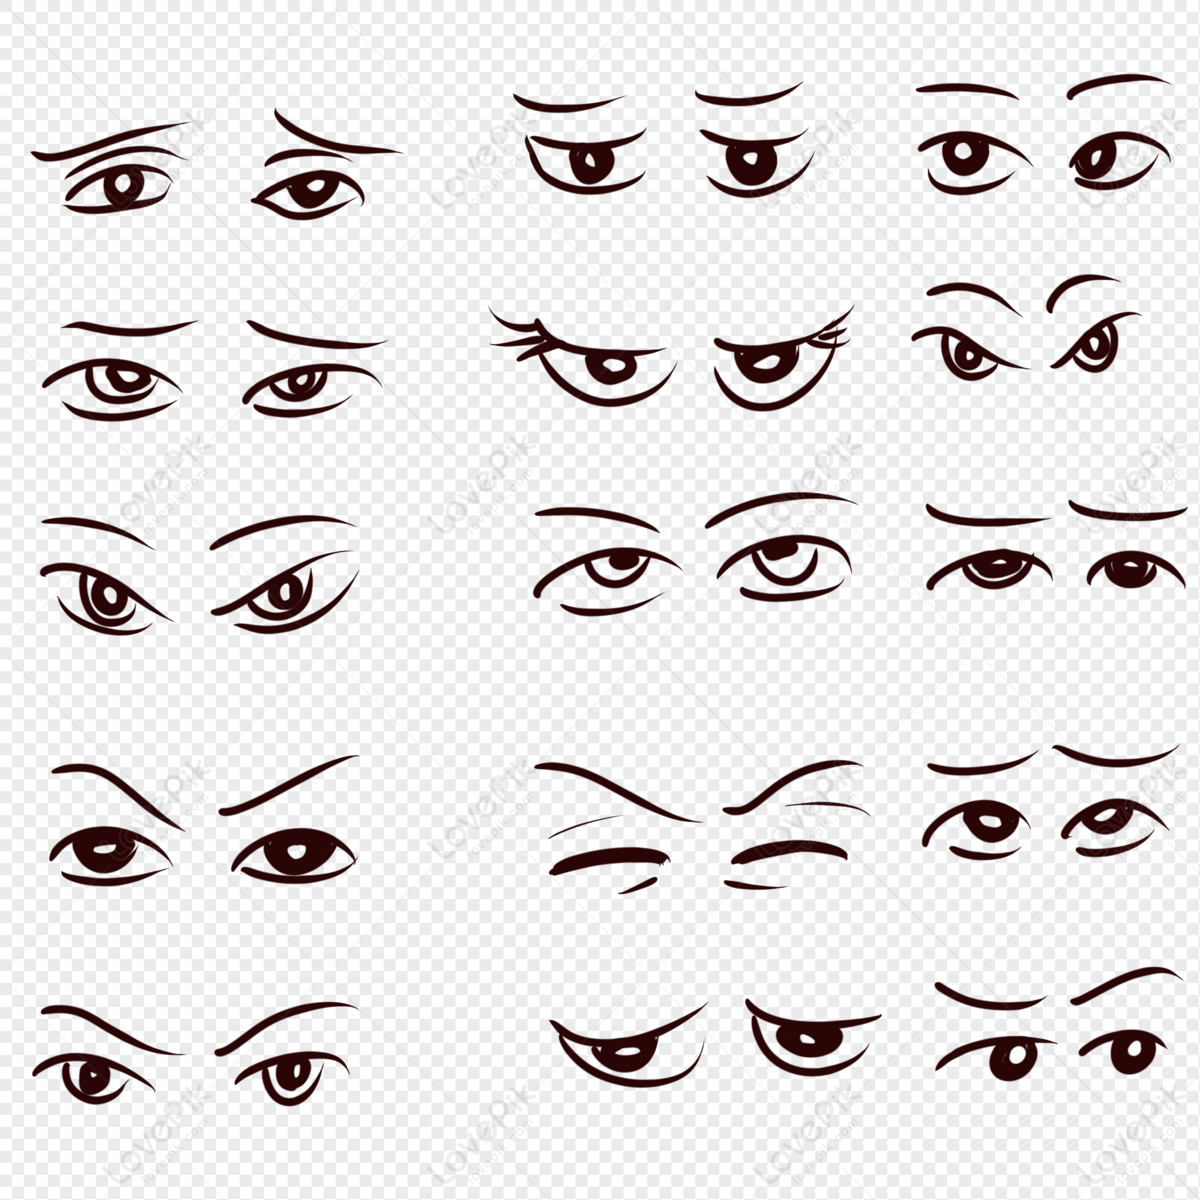 Male Eye Clipart Vector, Male Cartoon Eye Reference Material, Cartoon Eyes,  Quadratic Eye, Anime Eyes PNG Image For Free Download